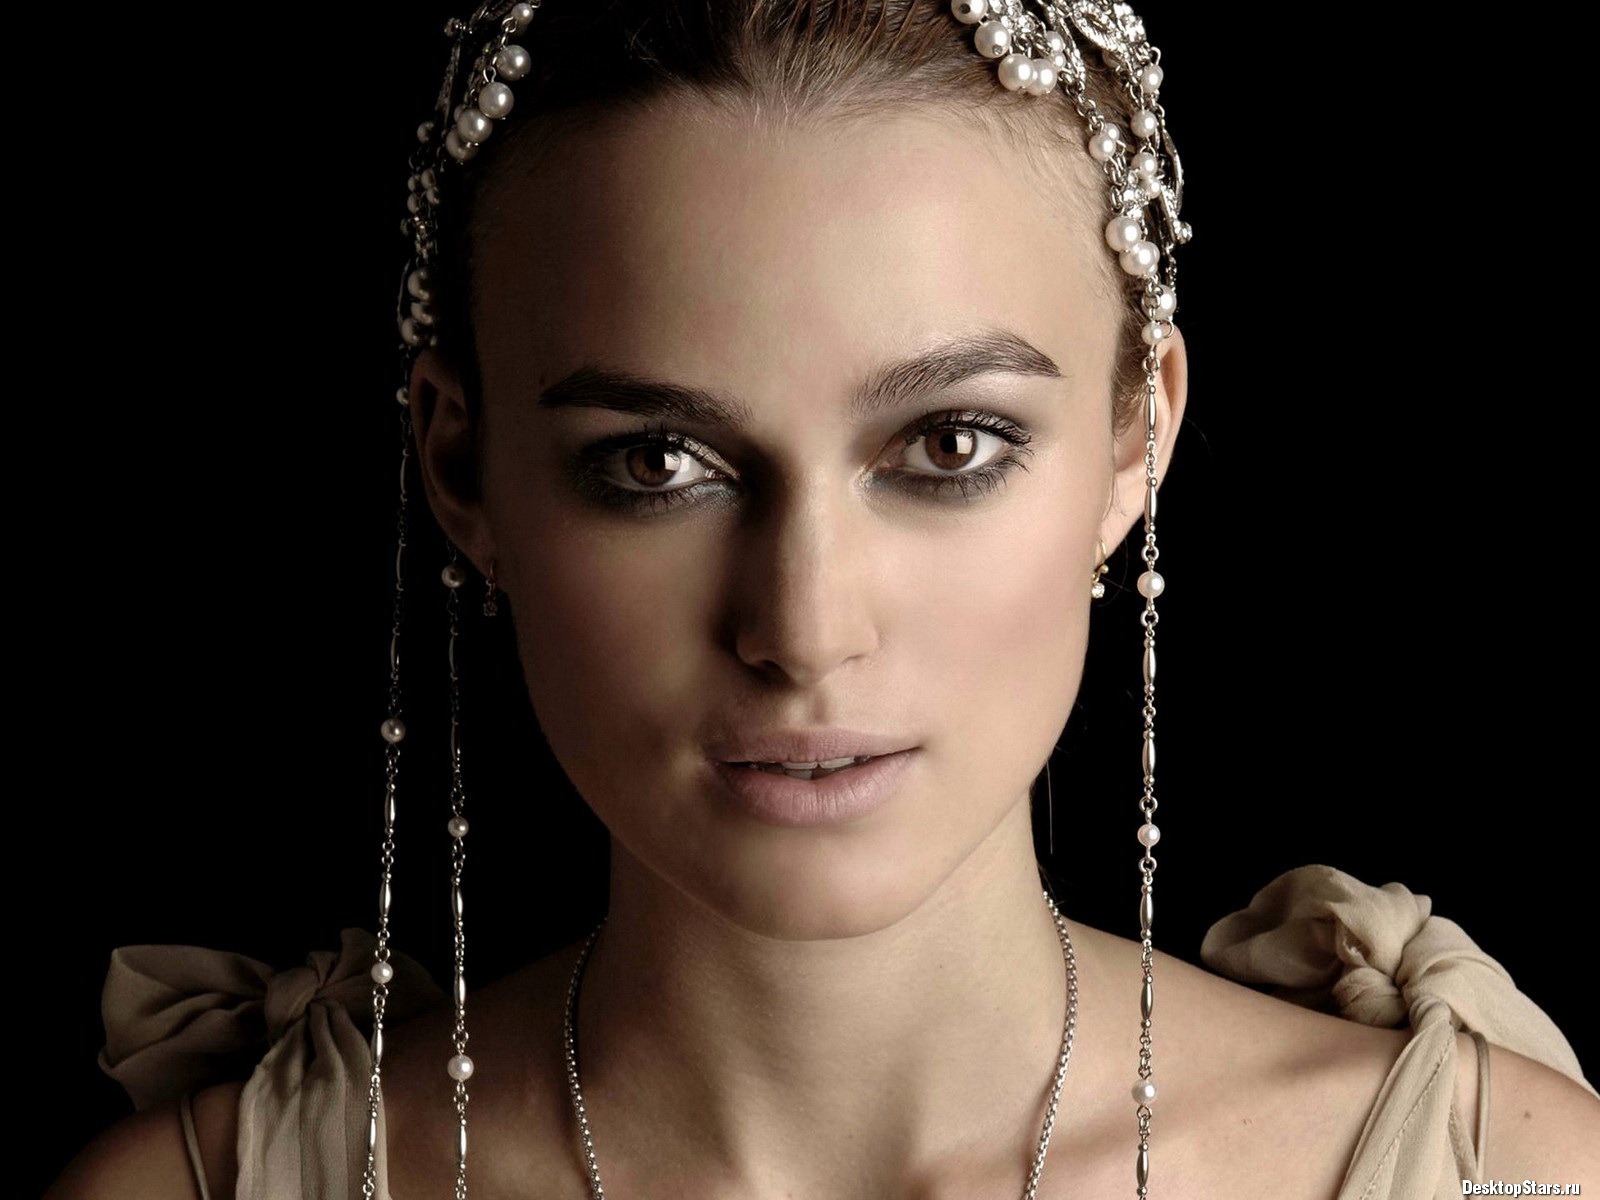 Keira Knightley #027 - 1600x1200 Wallpapers Pictures Photos Images